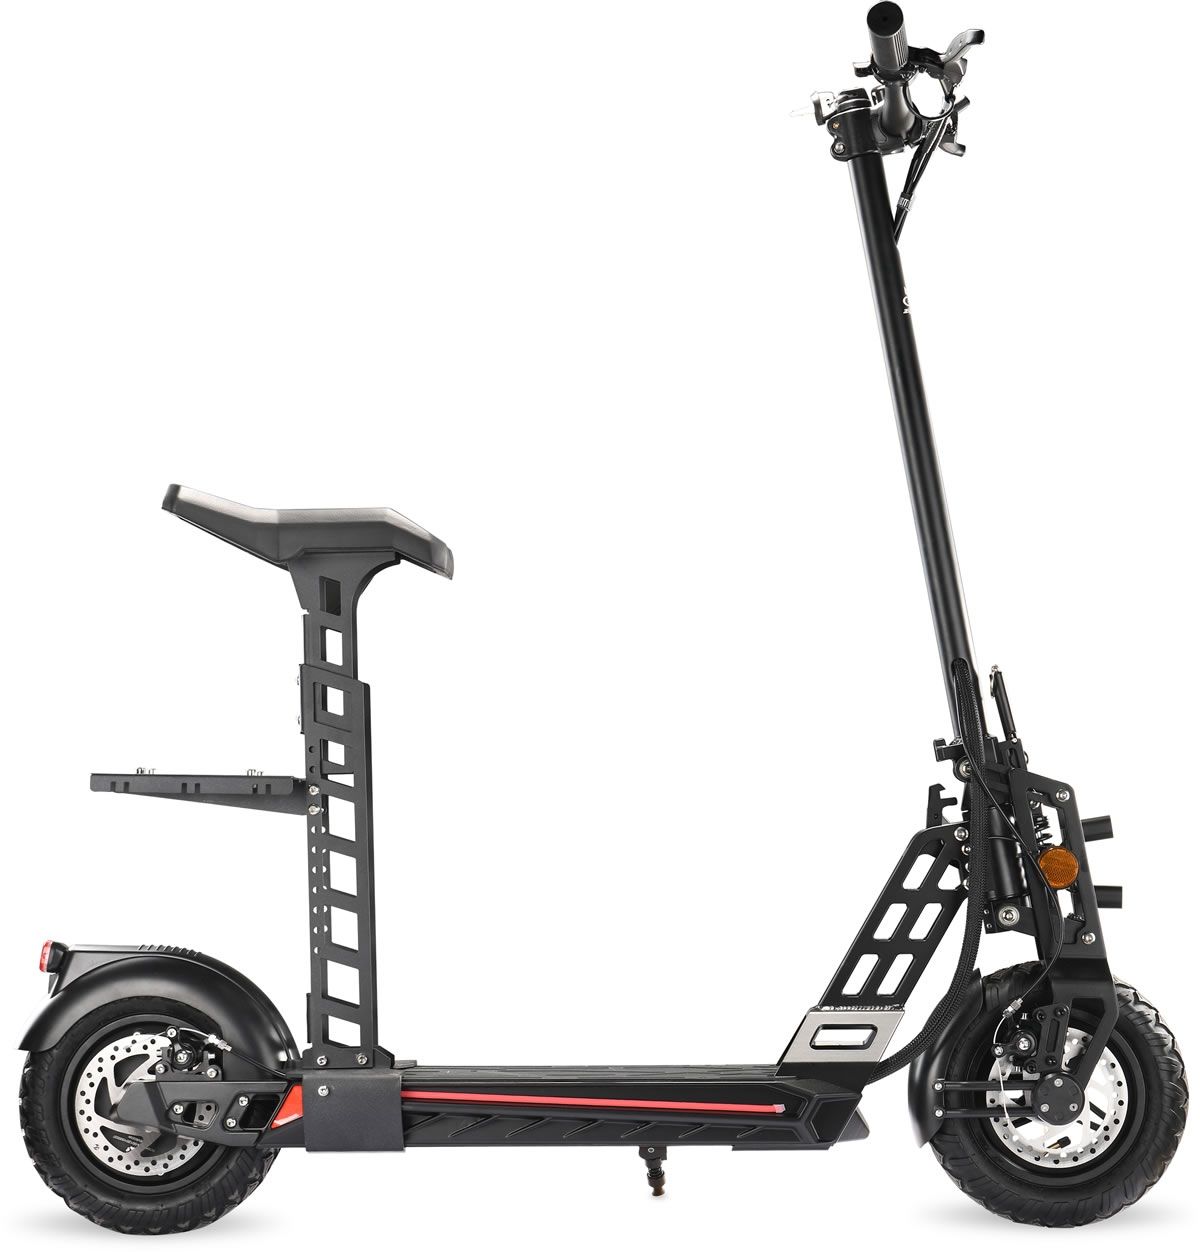 X1 SUPER HIGH 35 MILES RANGE FASTEST ELECTRIC SCOOTER